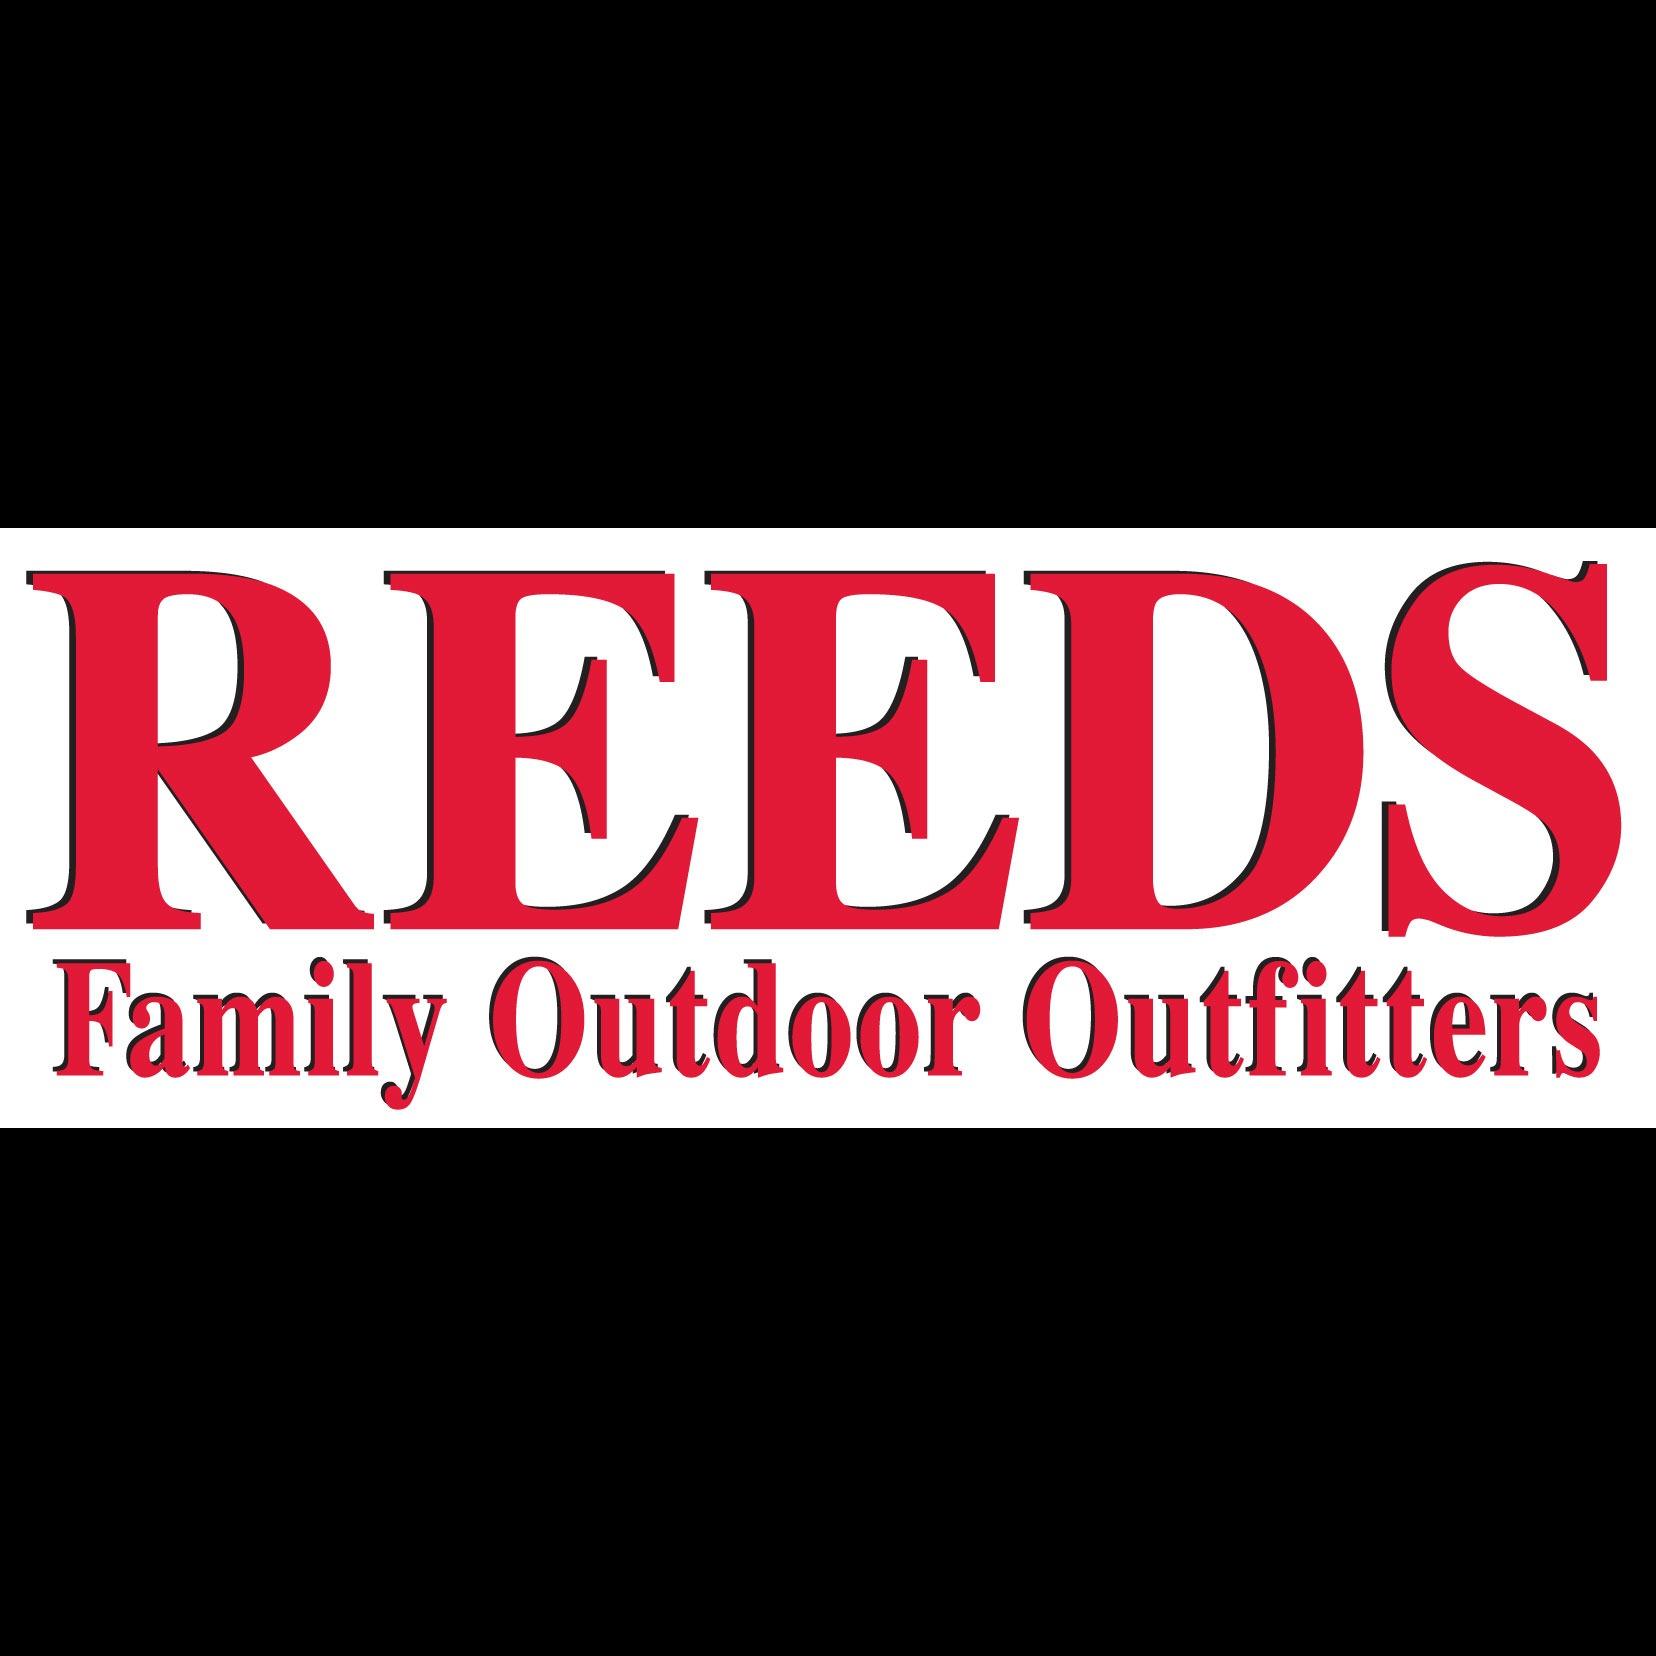 Reeds Family Outdoor Outfitters - Onamia, MN 56359 - (320)532-7333 | ShowMeLocal.com